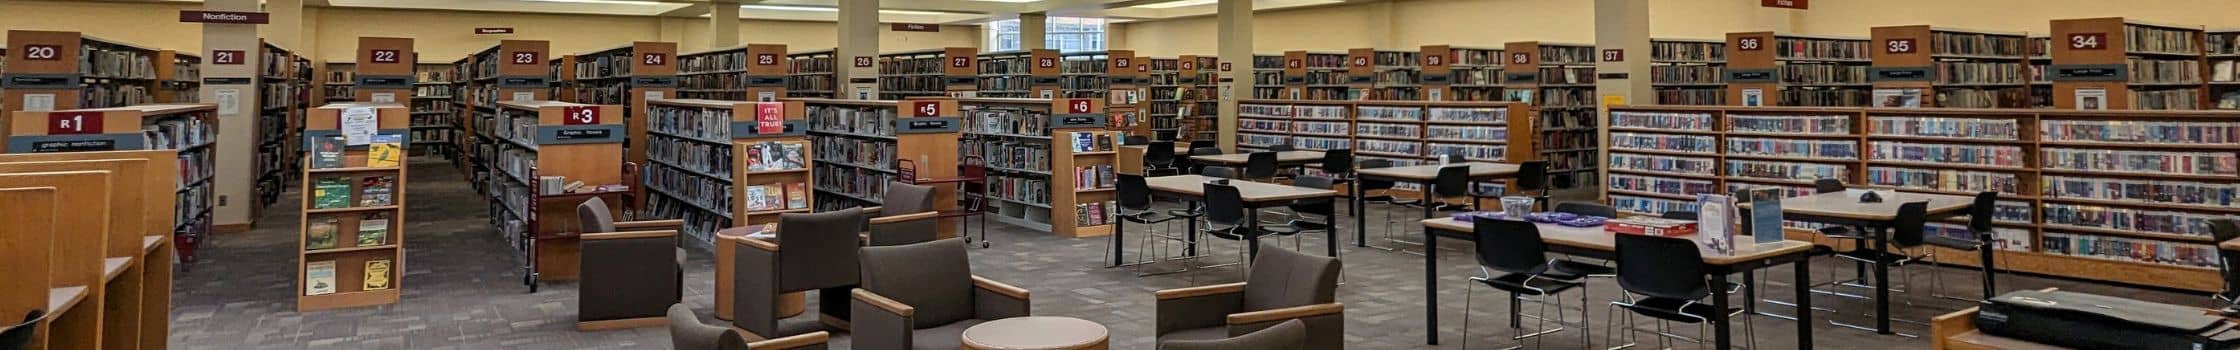 adult services department with books, and seating area